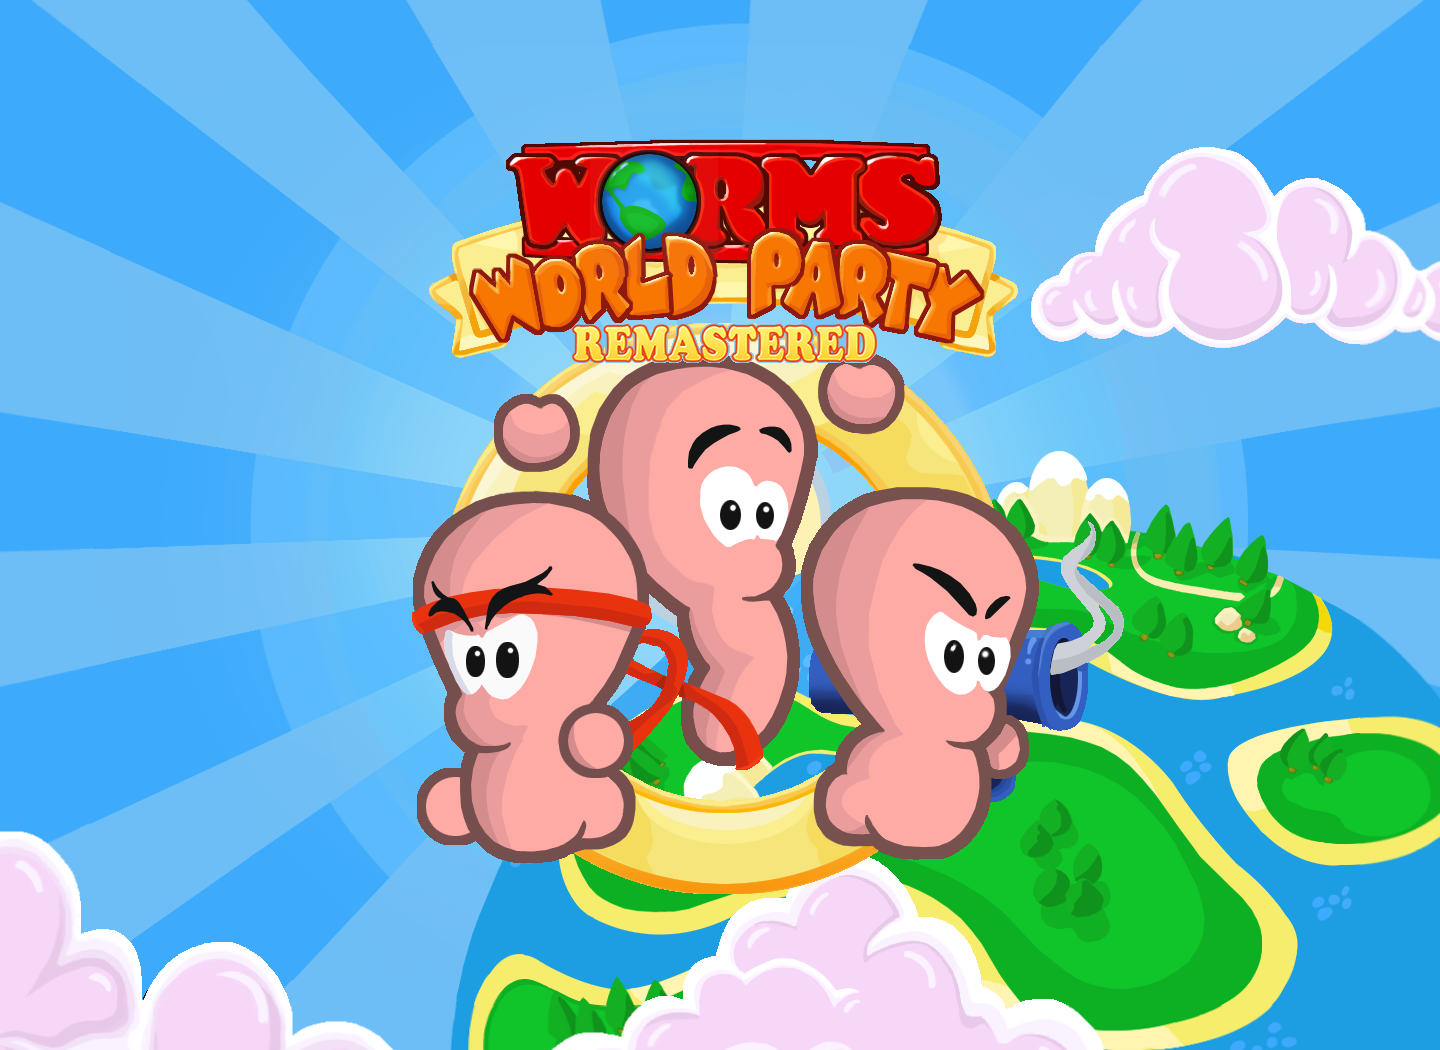 Worms World Party Remastered's title screen